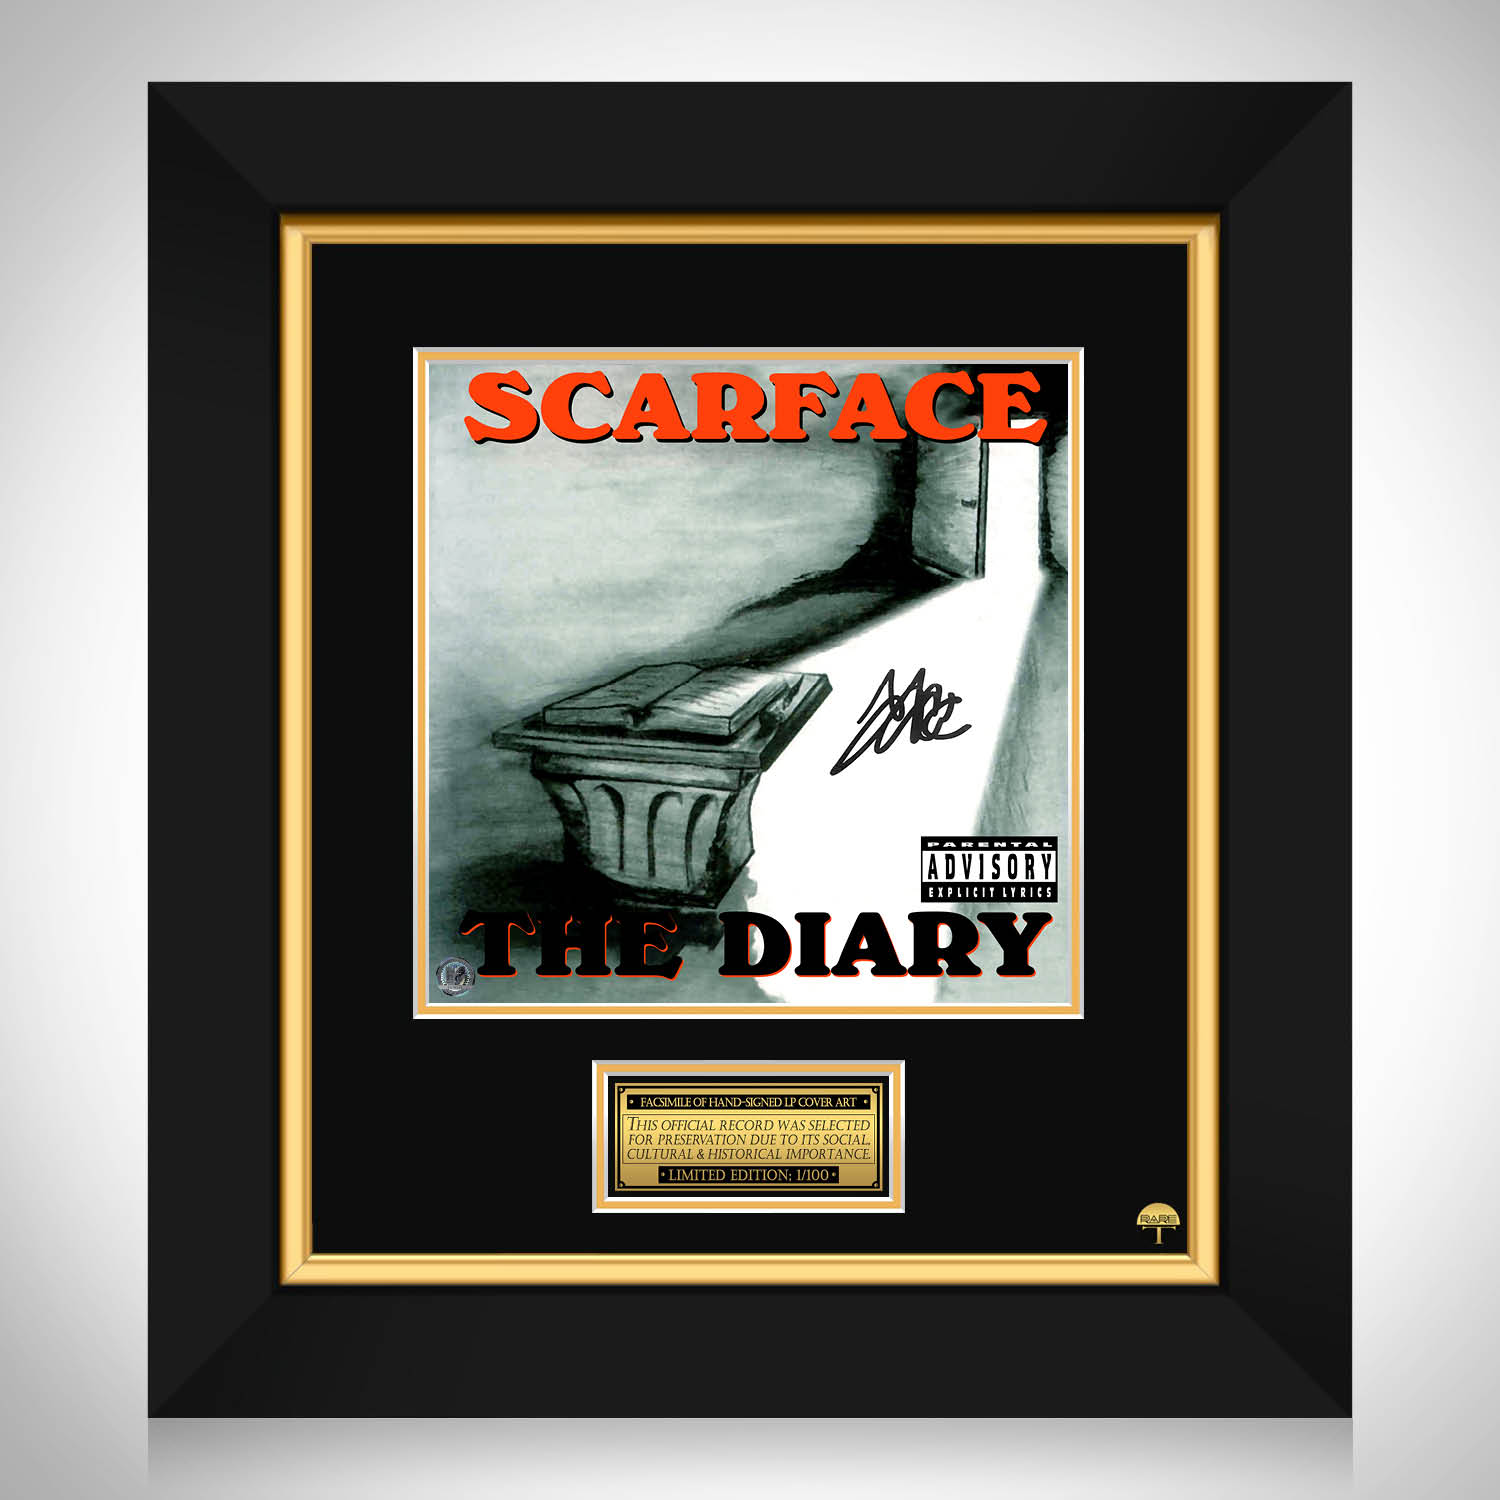 Scarface - The Diary LP Cover Limited Signature Edition Custom 